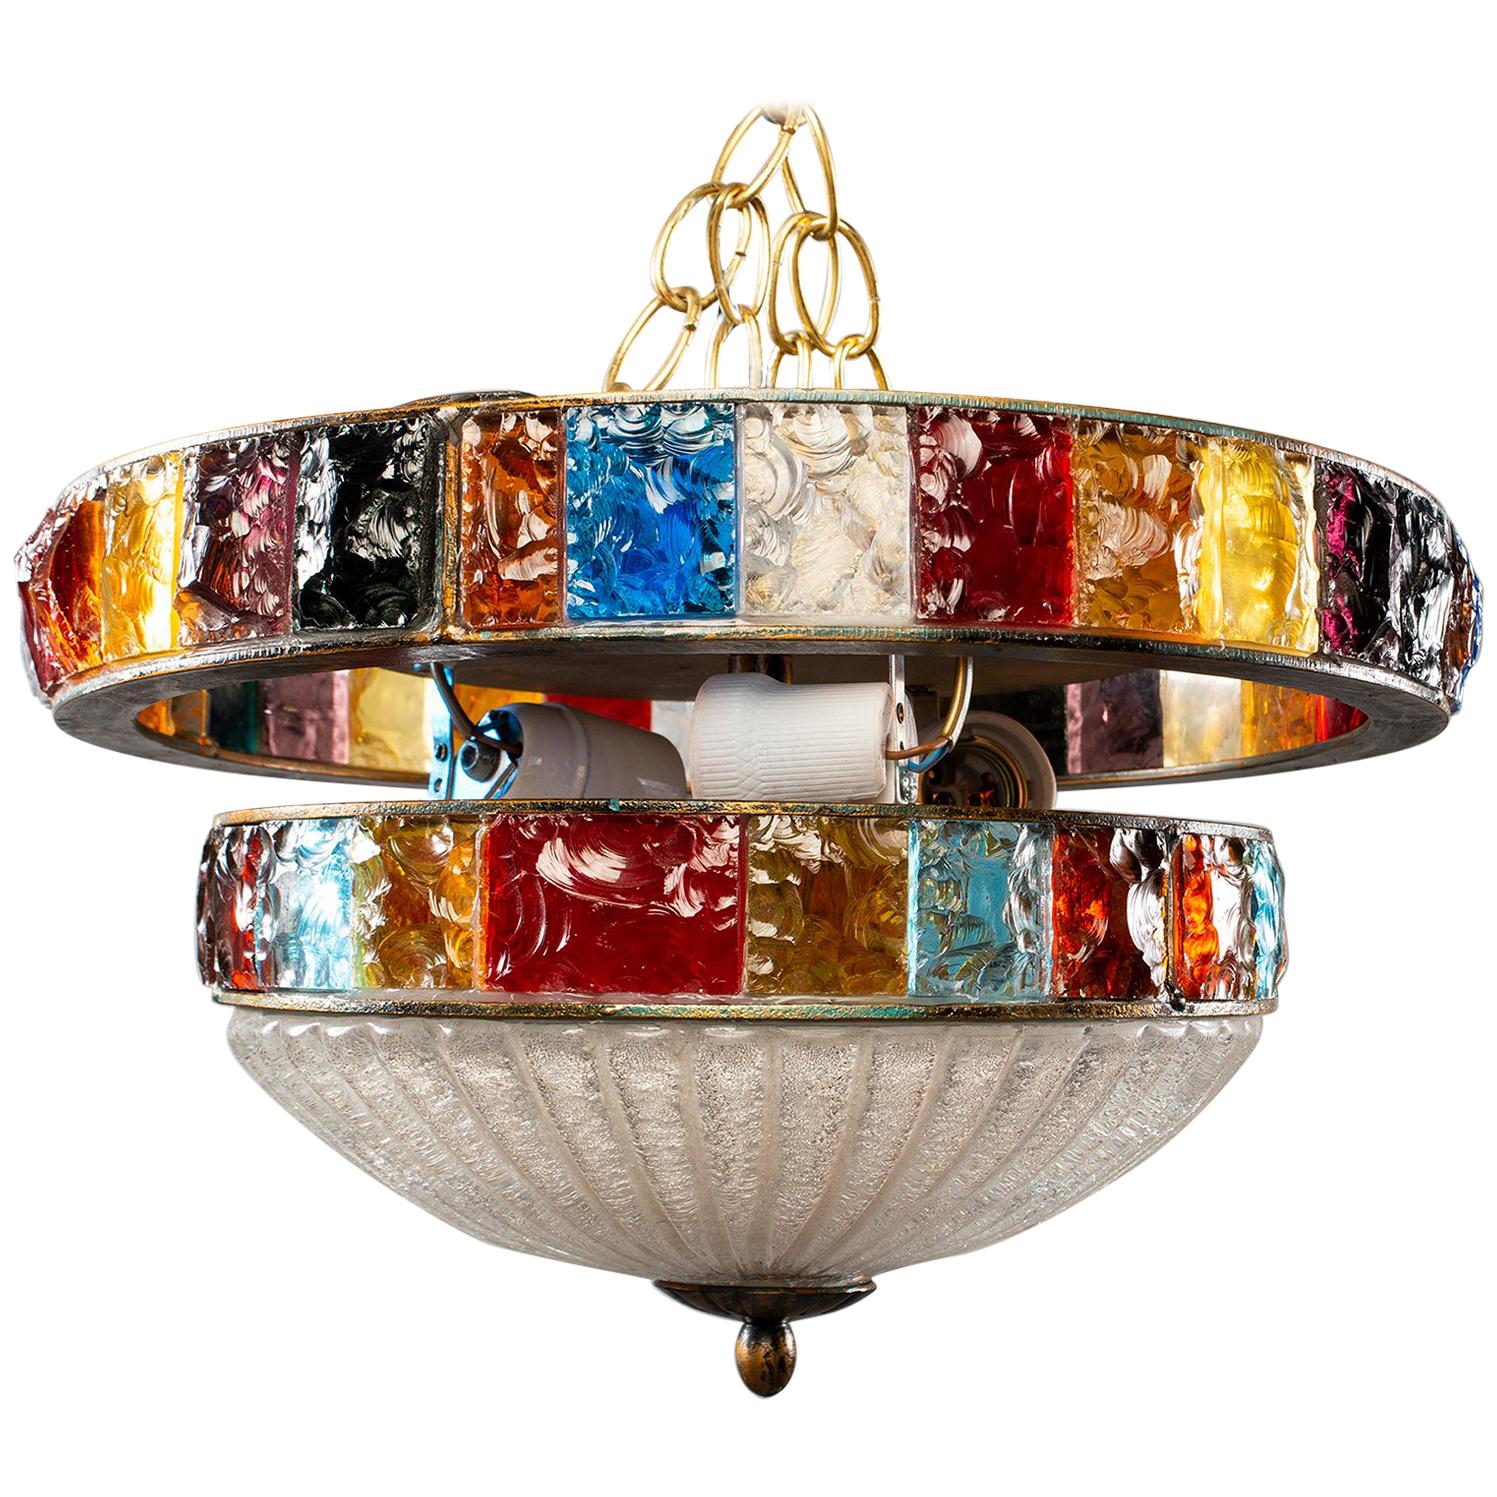 Midcentury Wall or Ceiling Fixture with Bands of Multicolored Glass